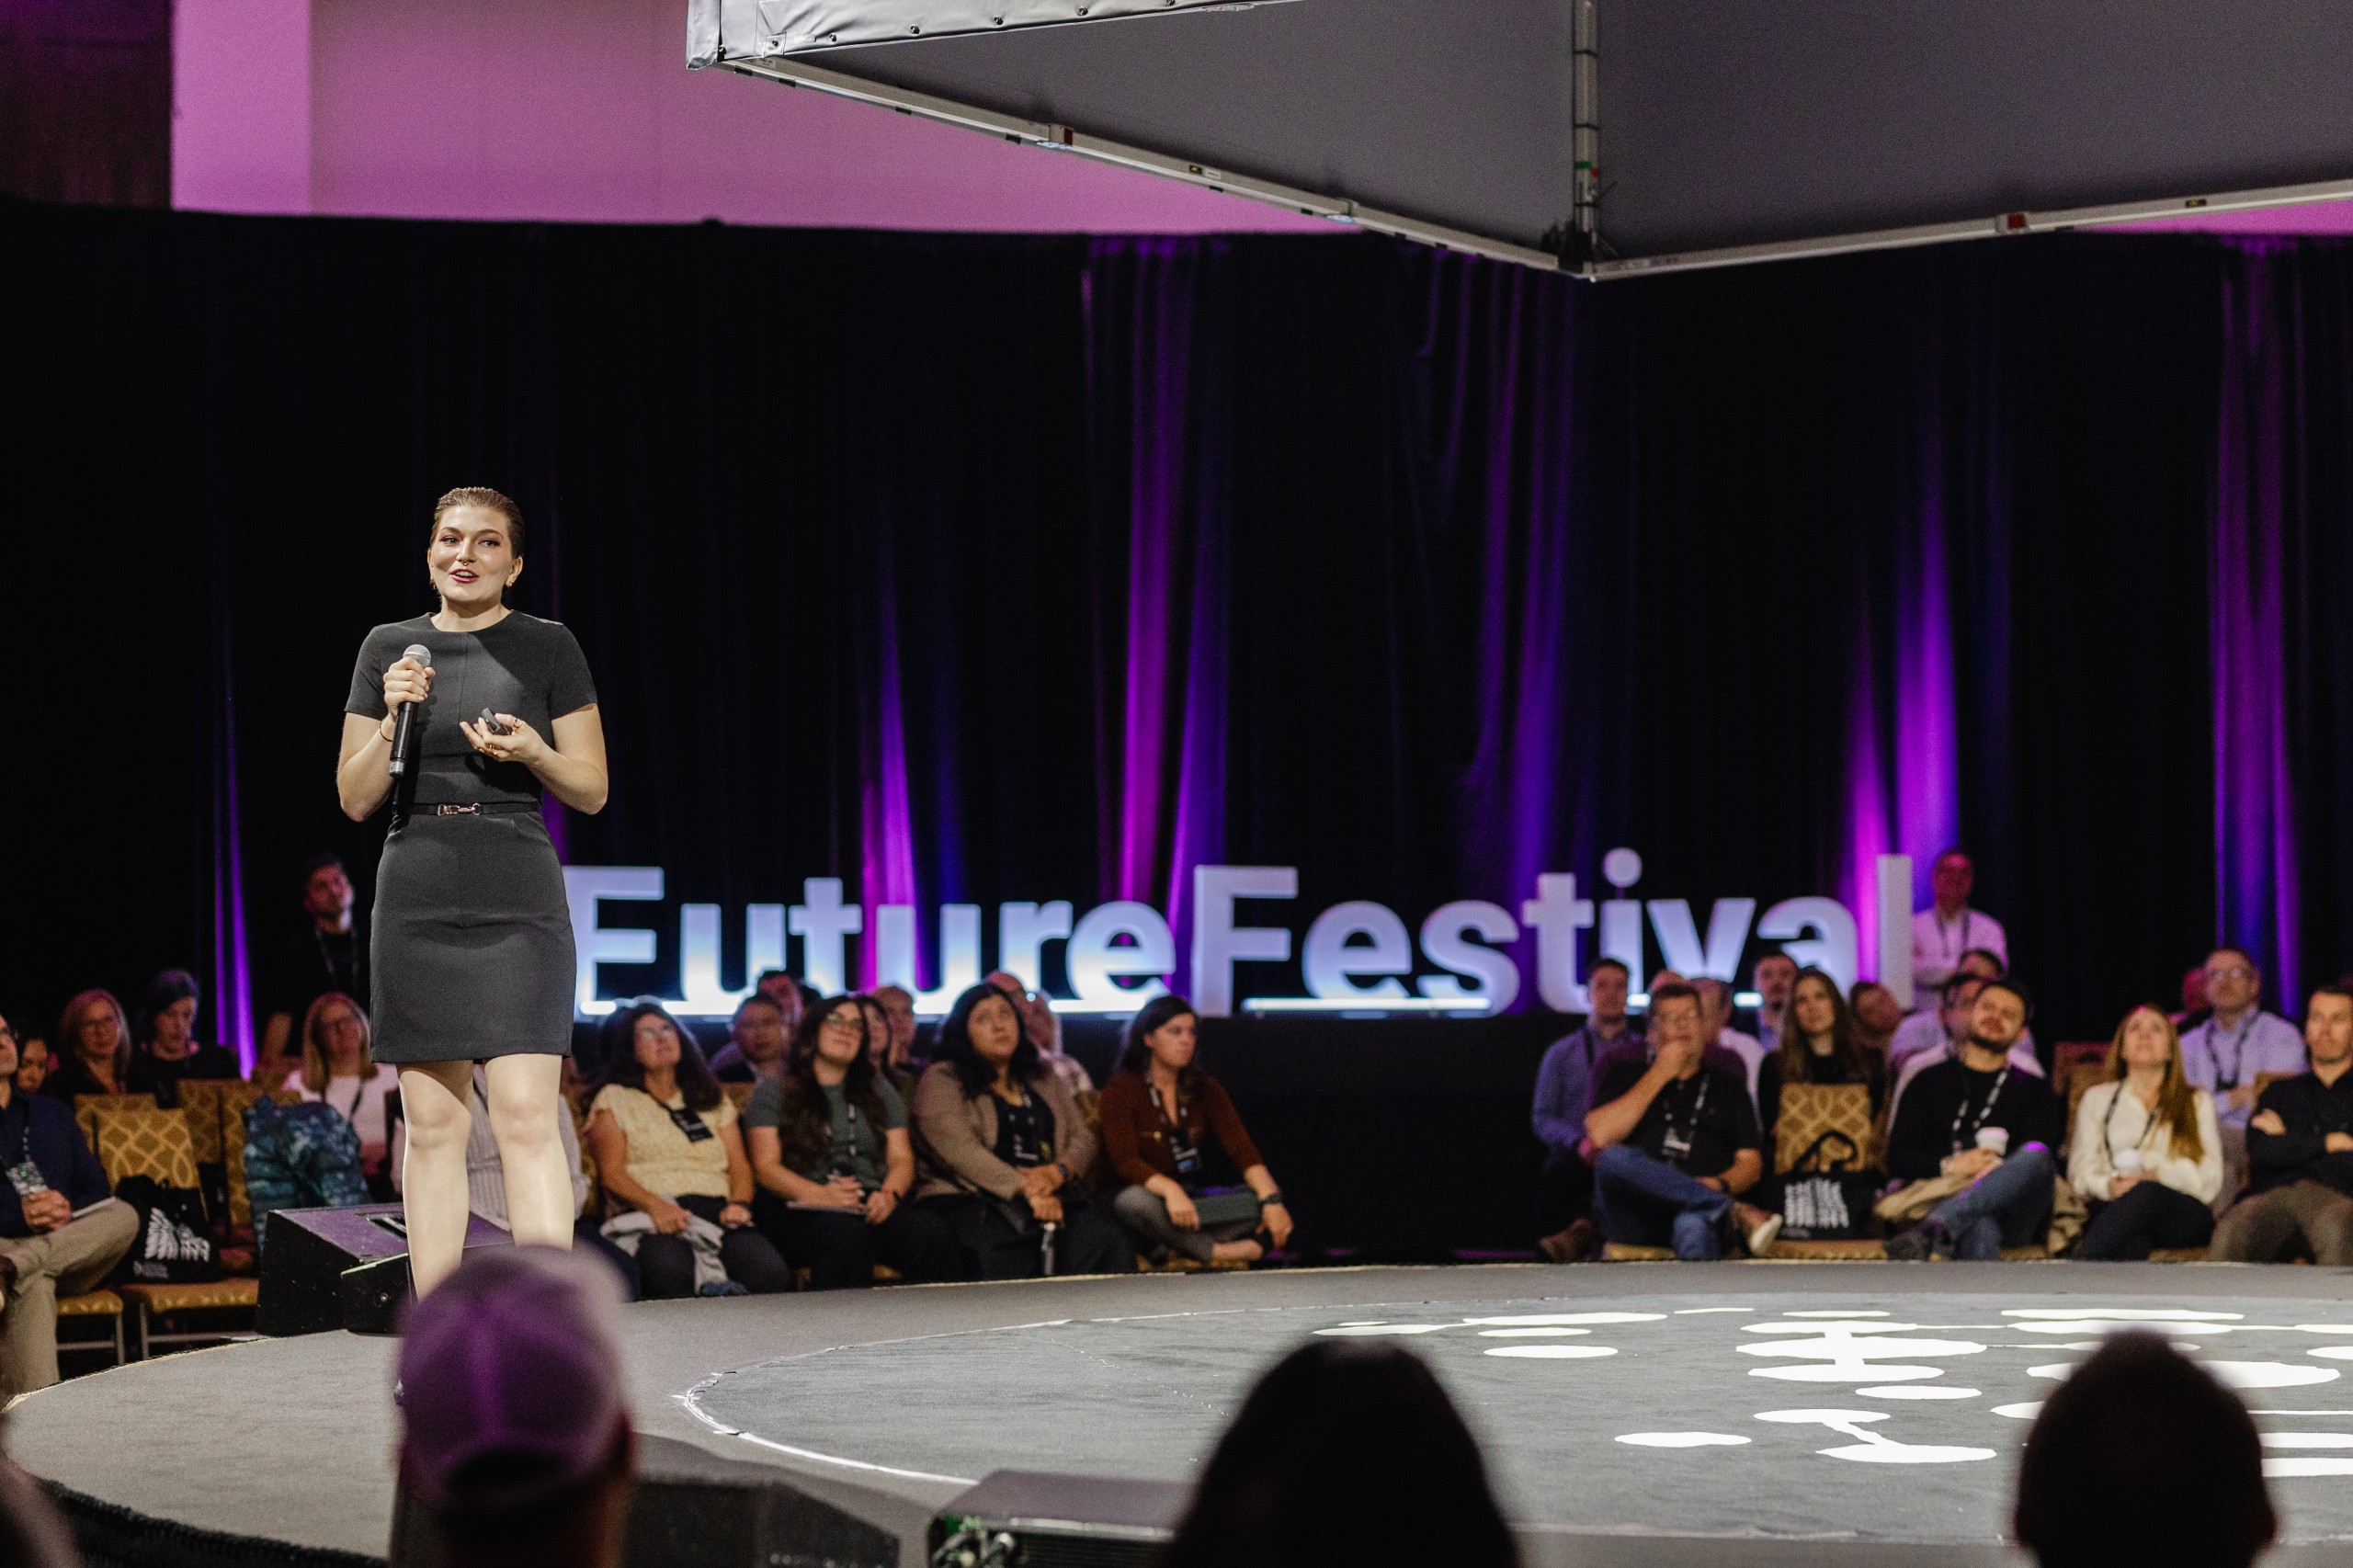 A woman delivering a captivating presentation at a vibrant future festival, captured through event photography.